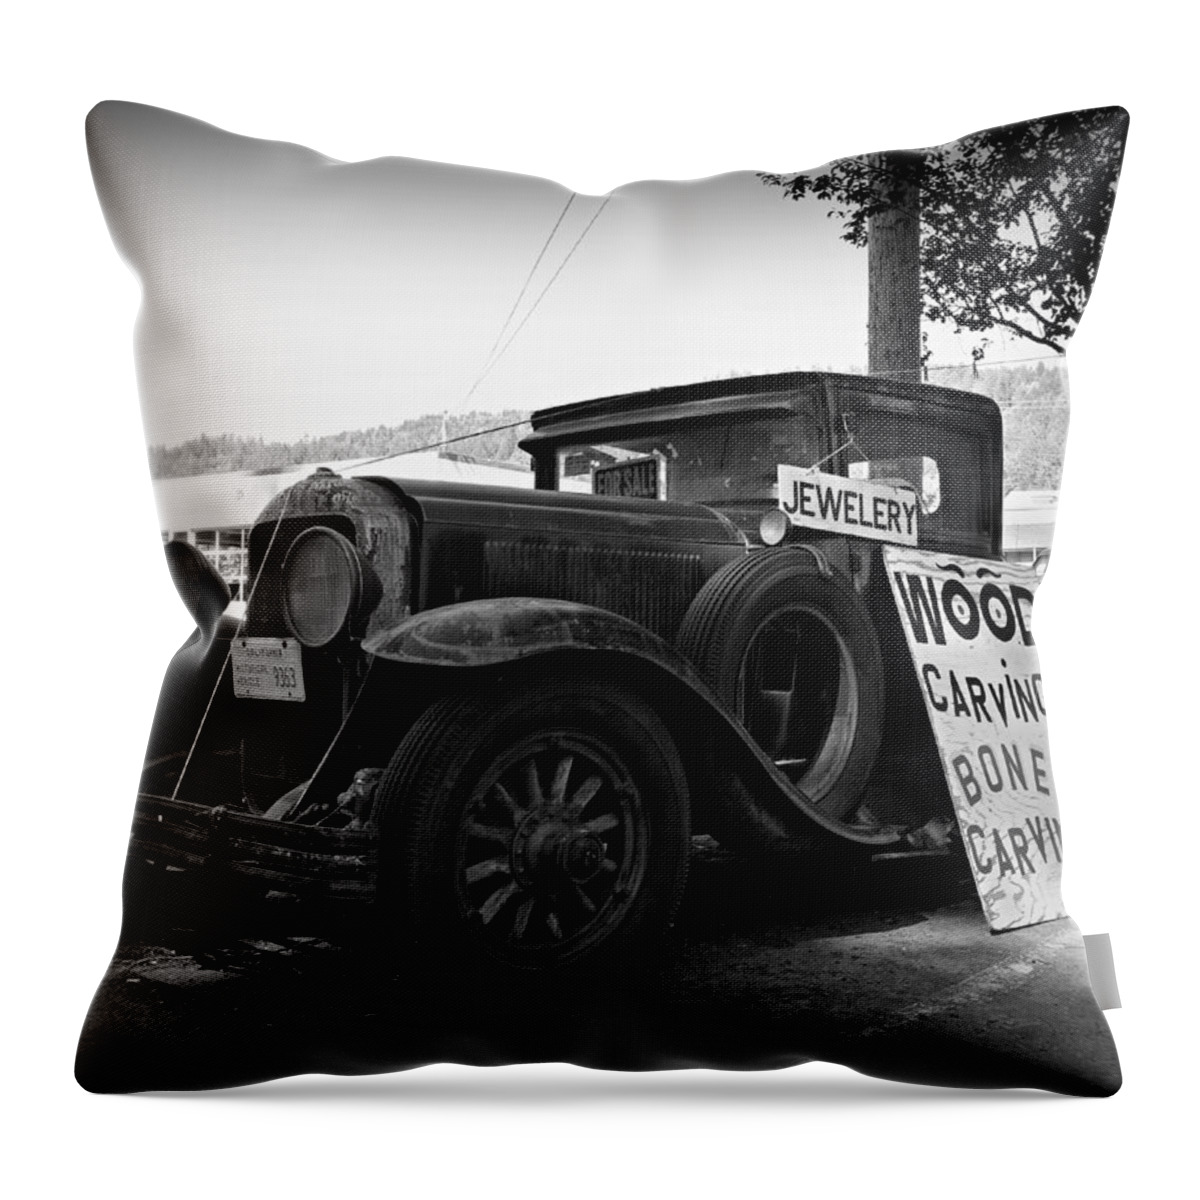 Creepy 1929 Buick Parked Along The Avenue Of The Giants In Miranda Throw Pillow featuring the photograph Wood Carvings Bone Carvings by Steve Natale